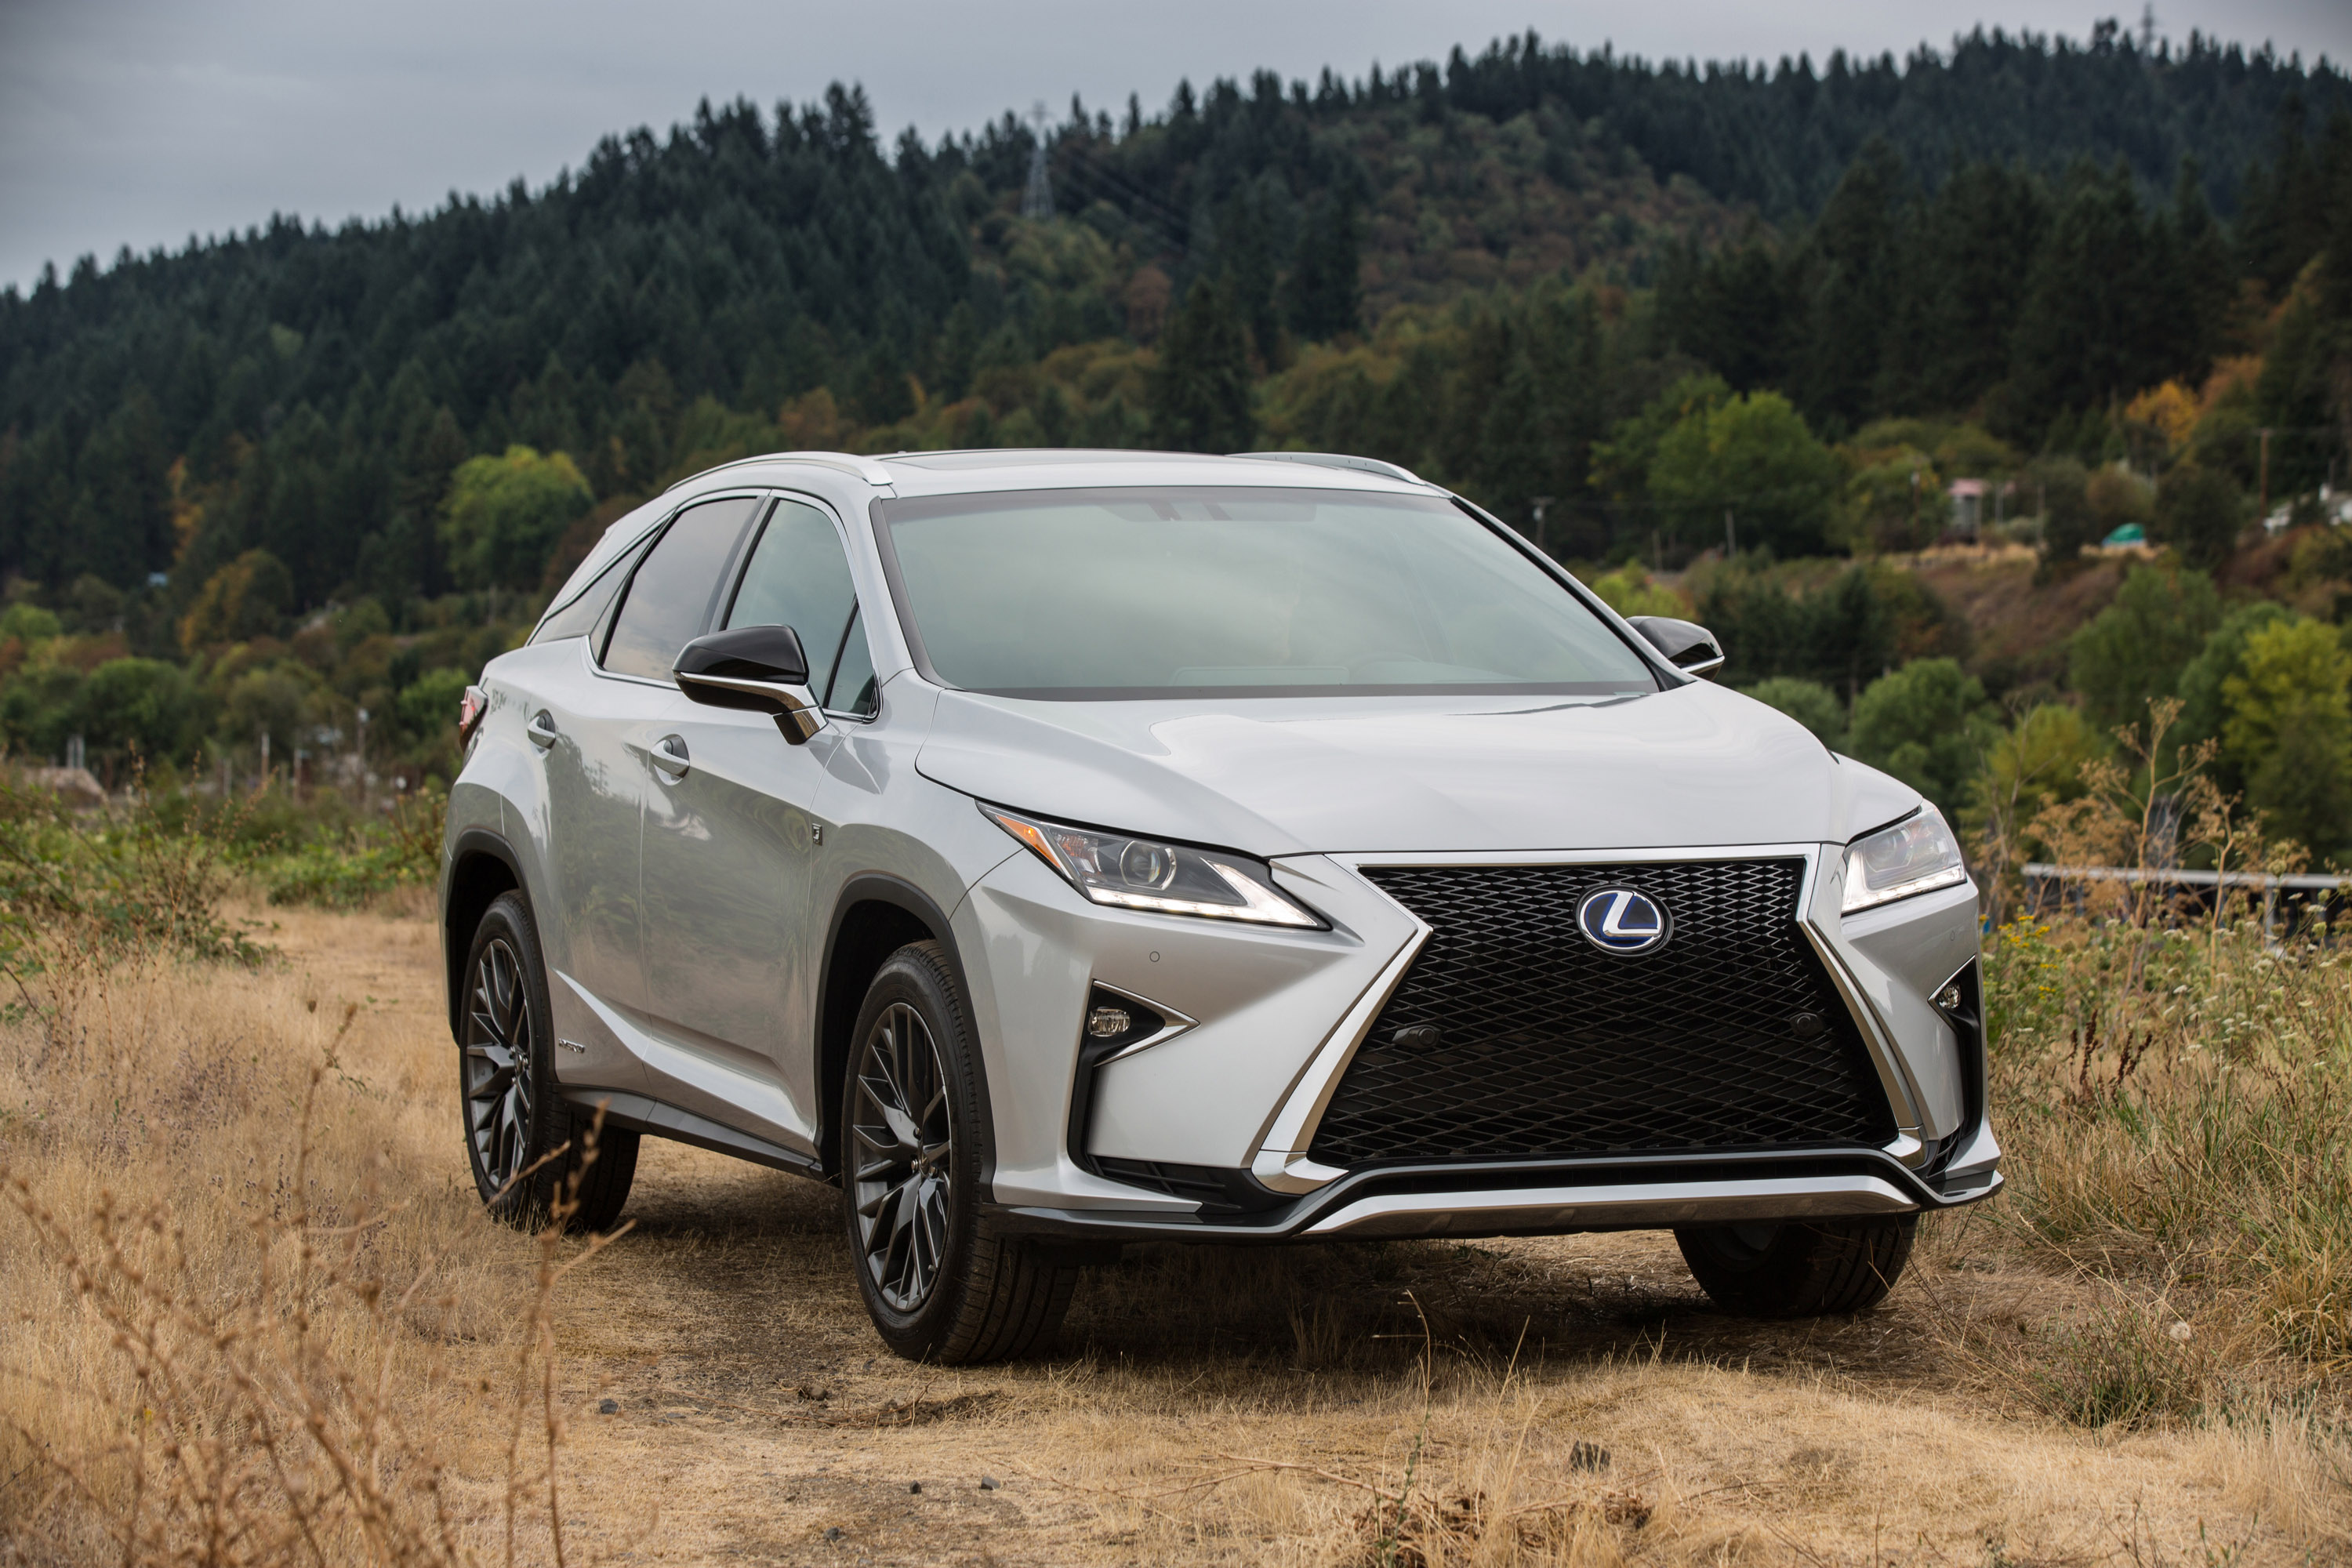 2016 Lexus RX Facelift is here